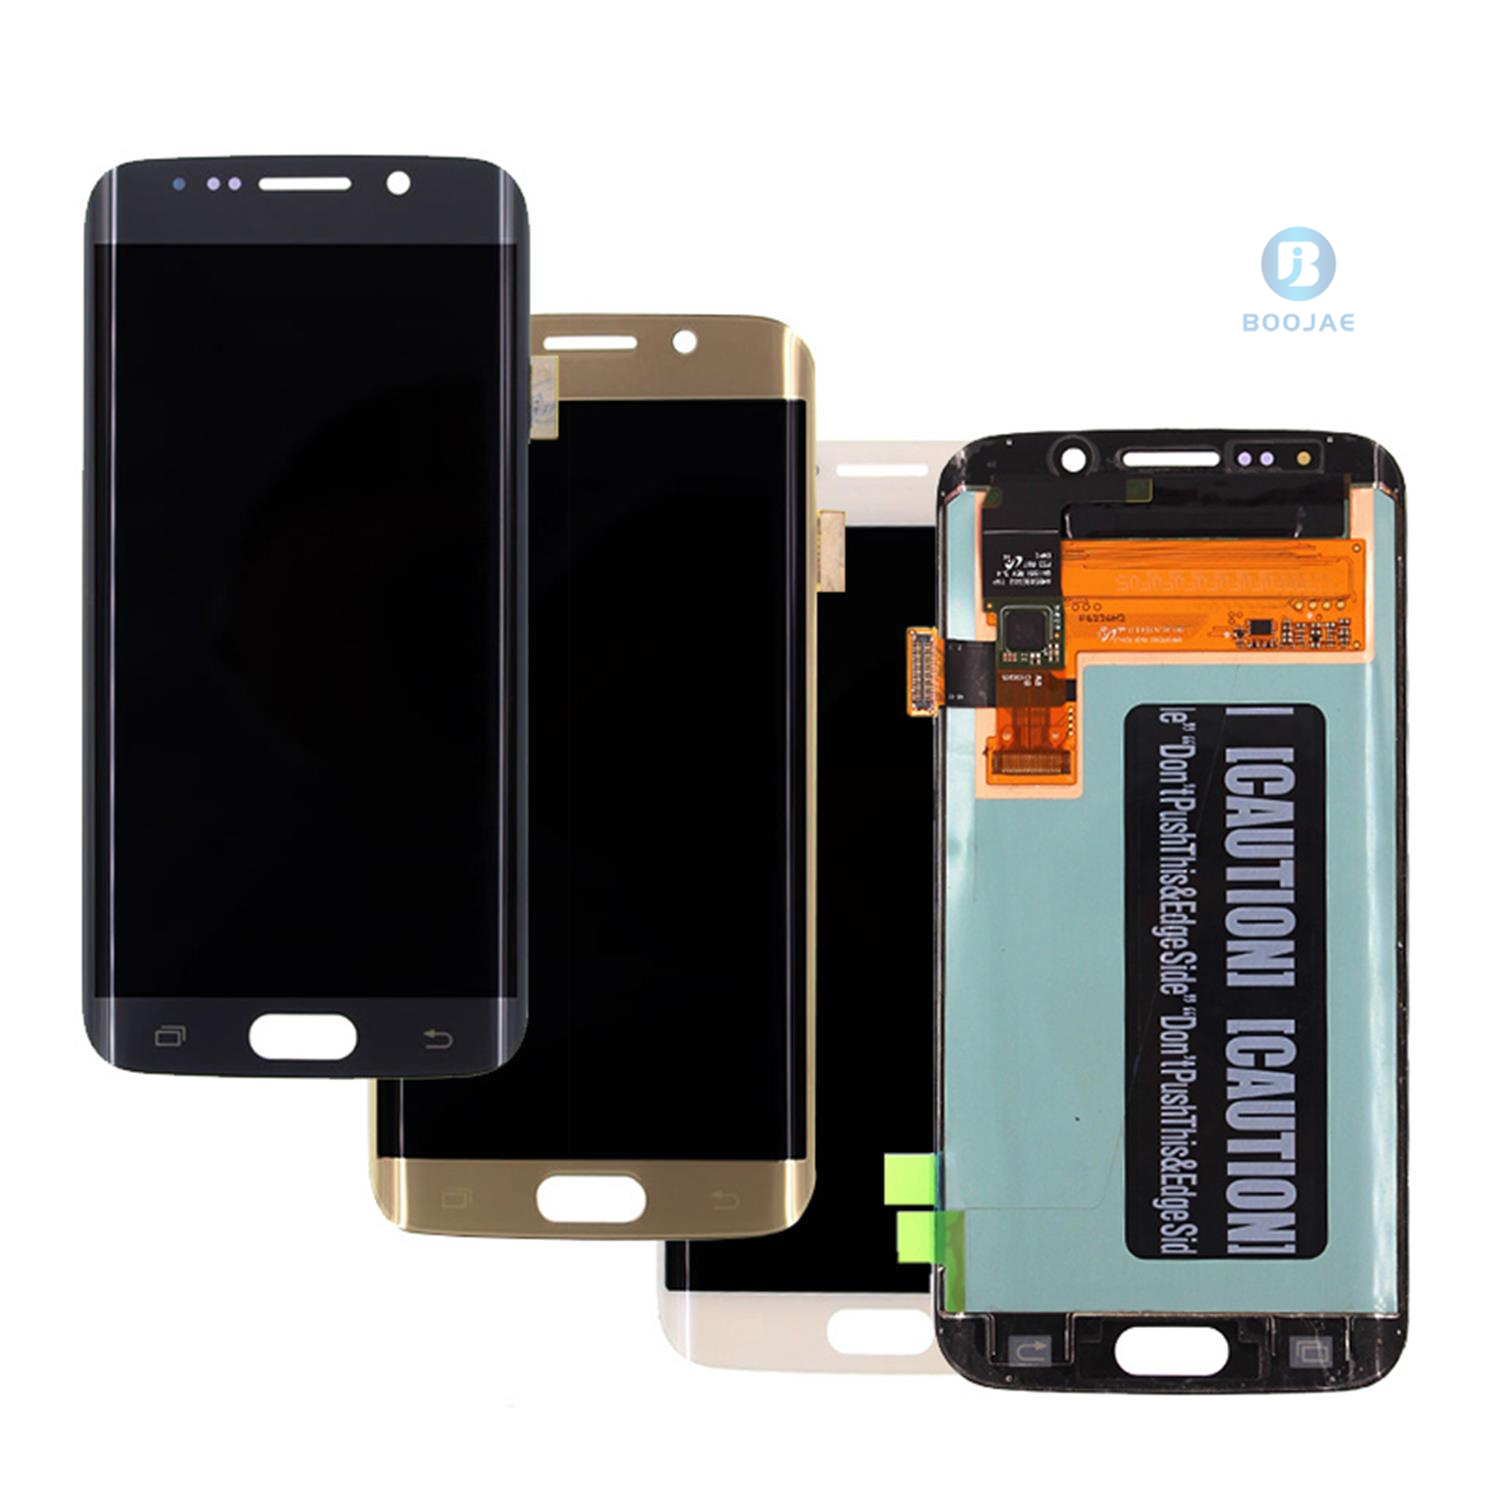 Samsung Galaxy S6 Edge LCD Screen Display and Touch Panel Digitizer Assembly Replacement